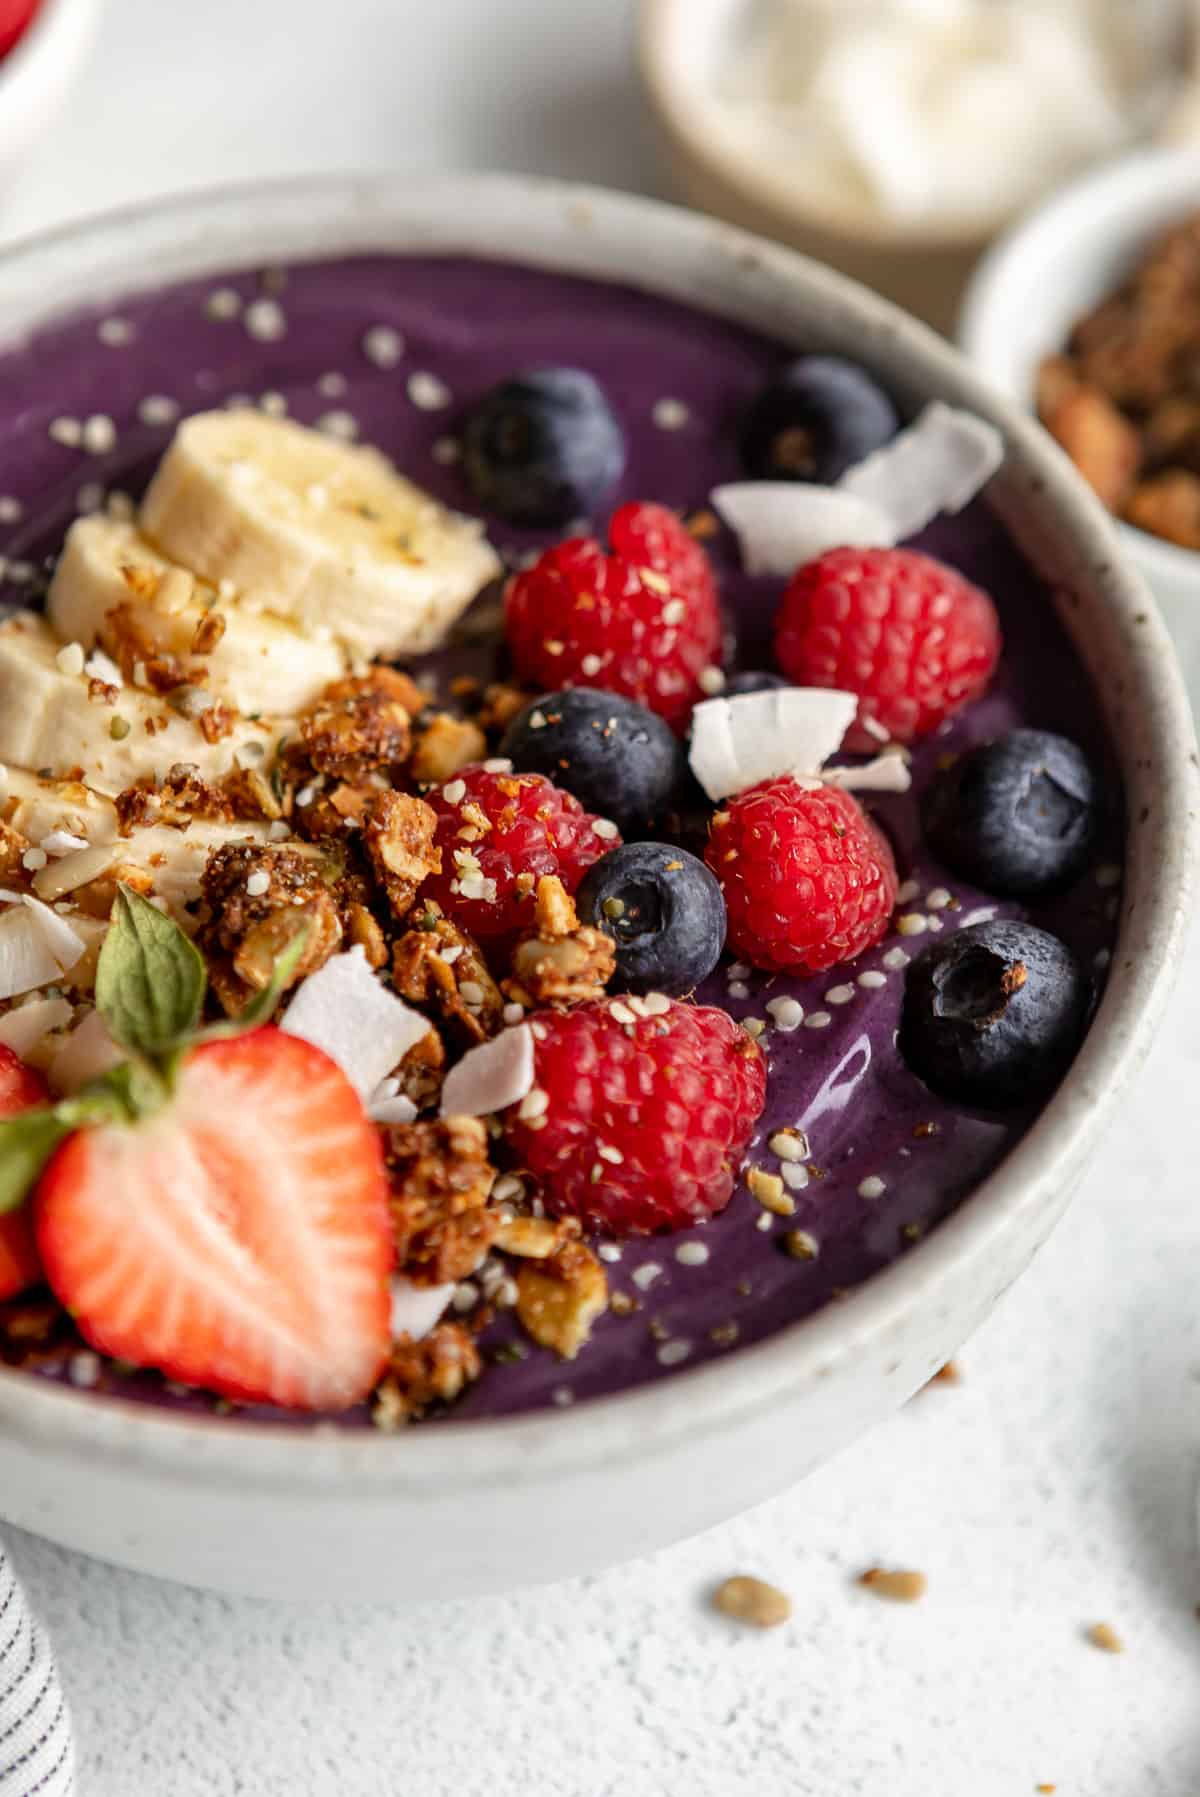 angled view of the acai bowl to show thick creamy texture